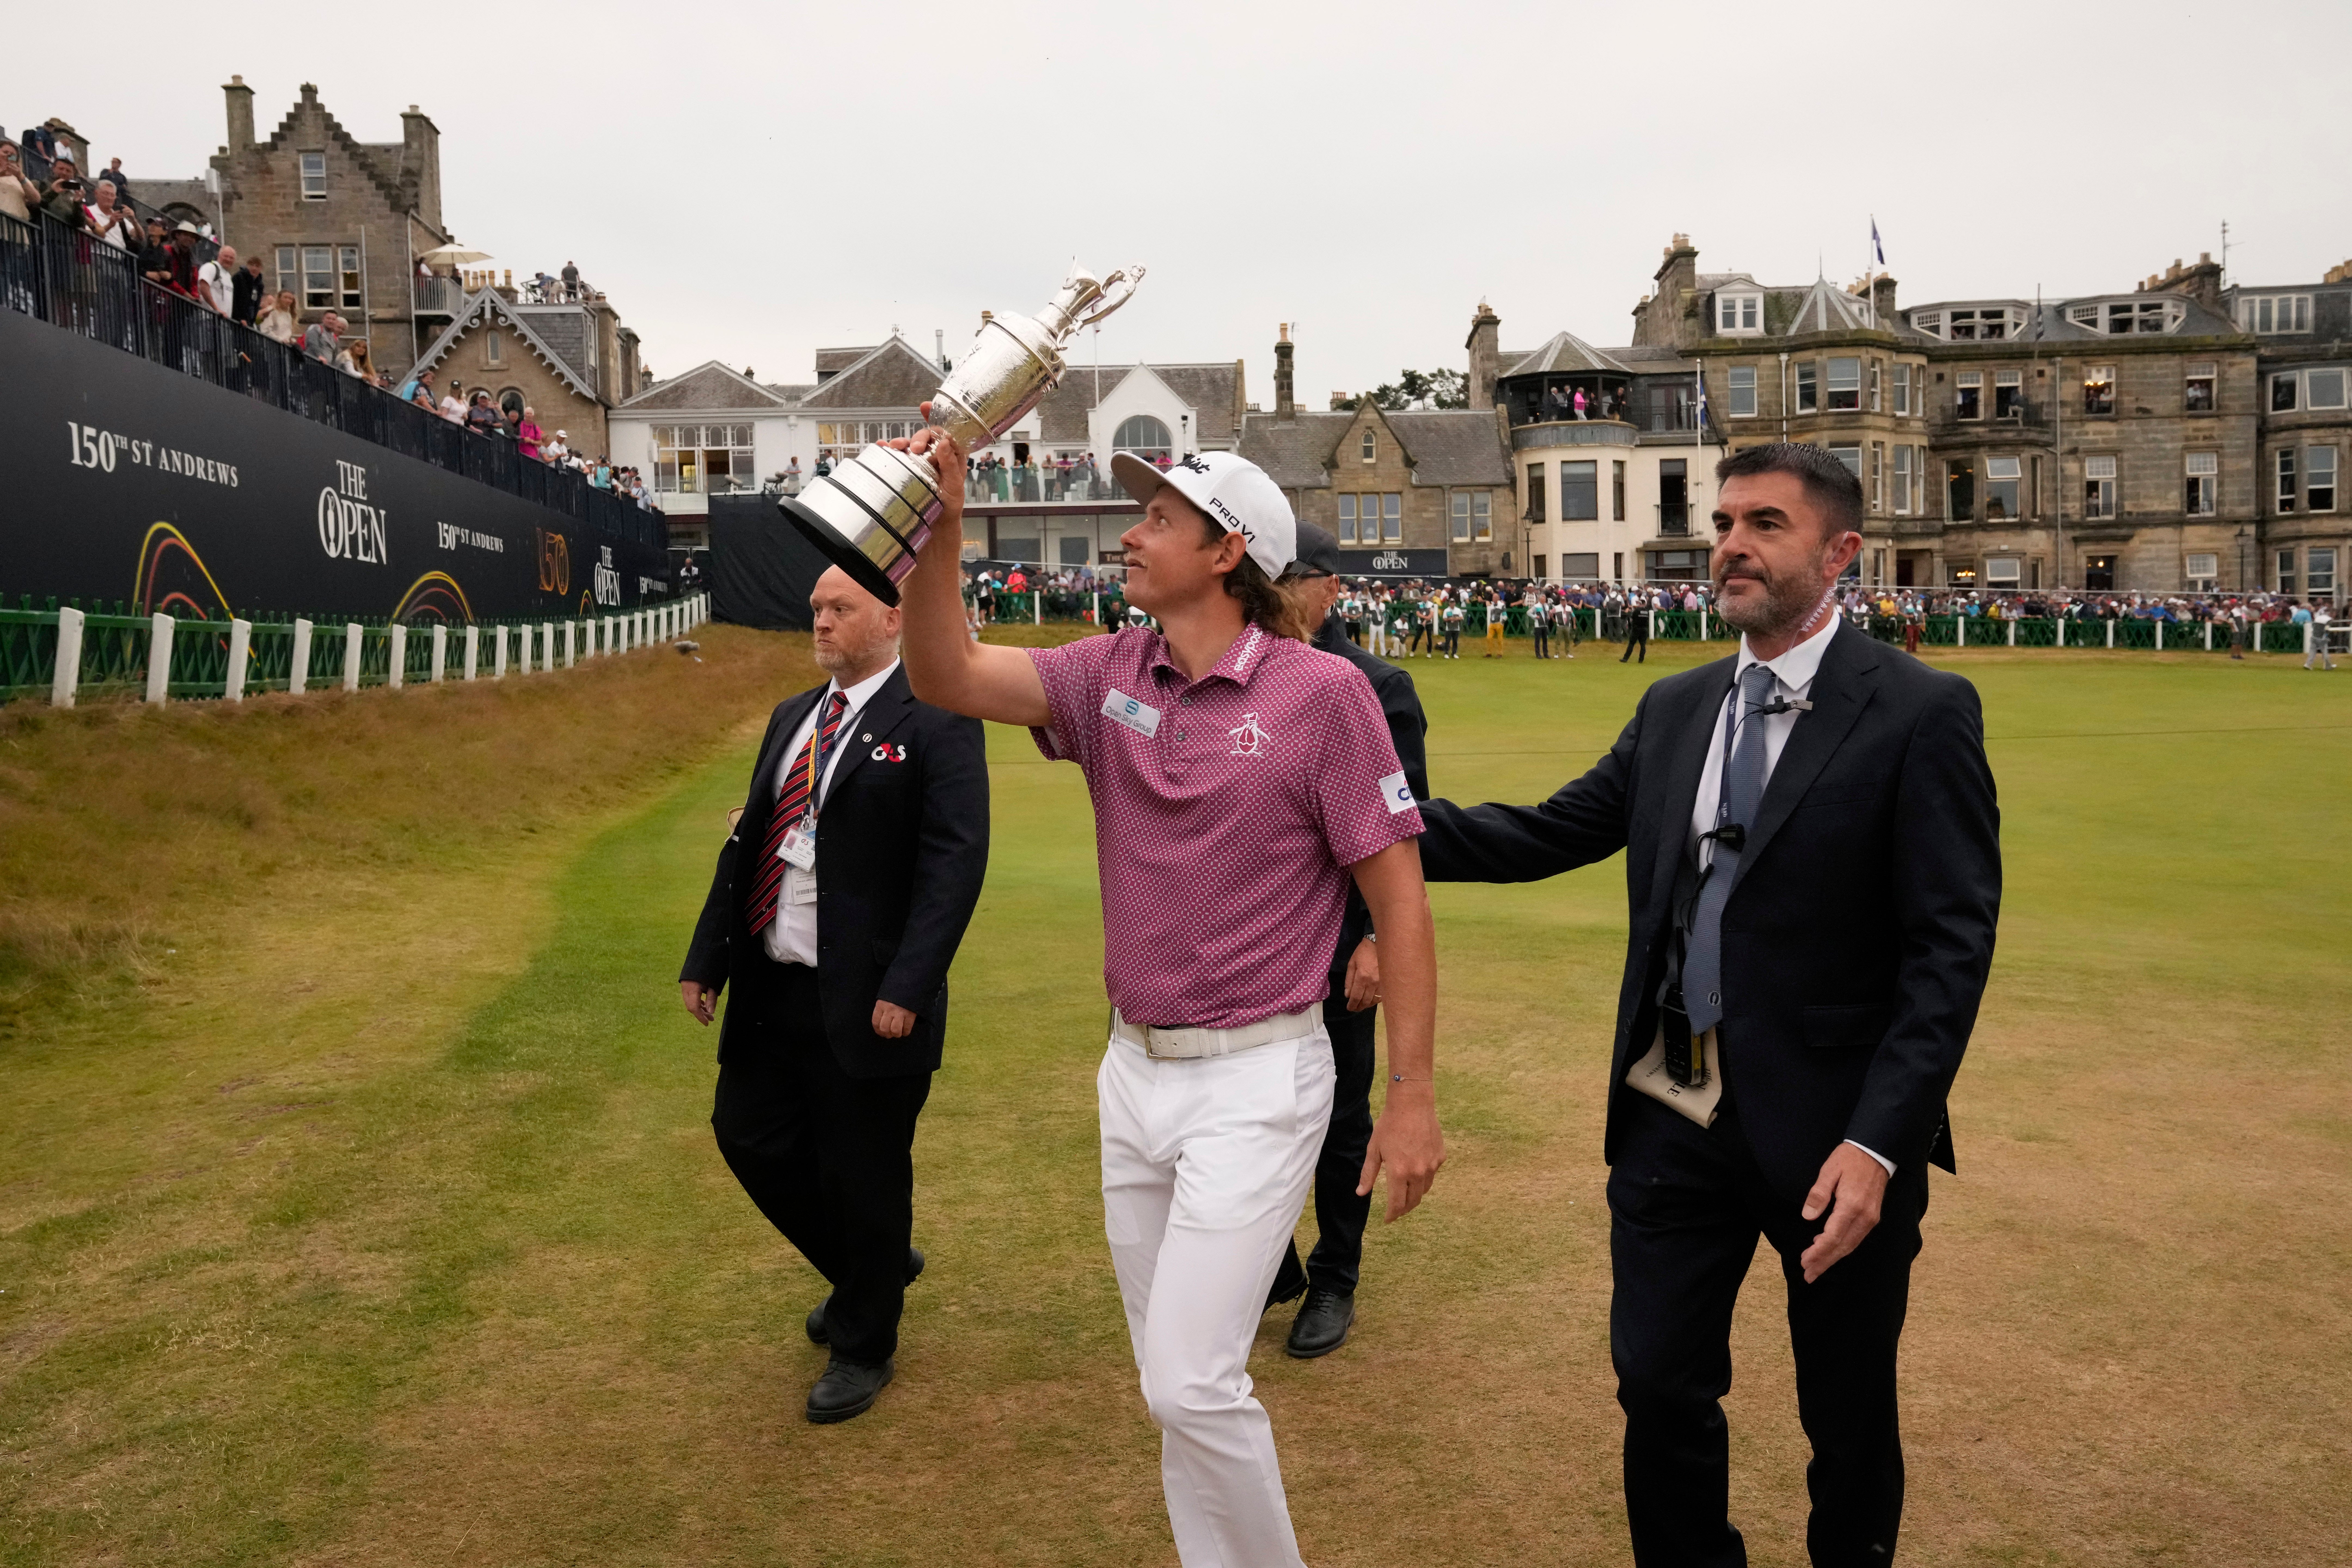 Smith claimed the Claret Jug with a stunning final round on Sunday